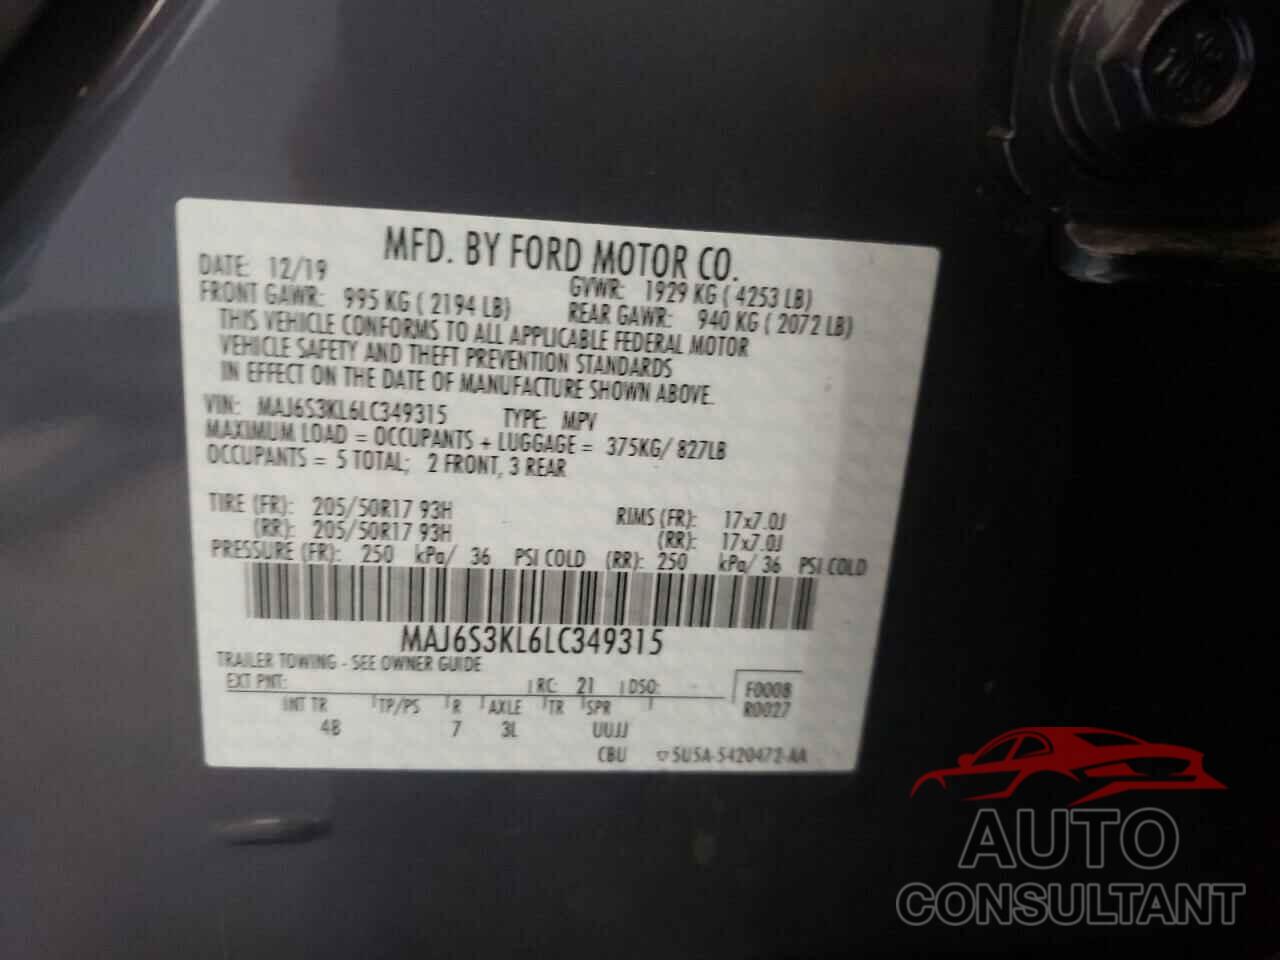 FORD ALL OTHER 2020 - MAJ6S3KL6LC349315